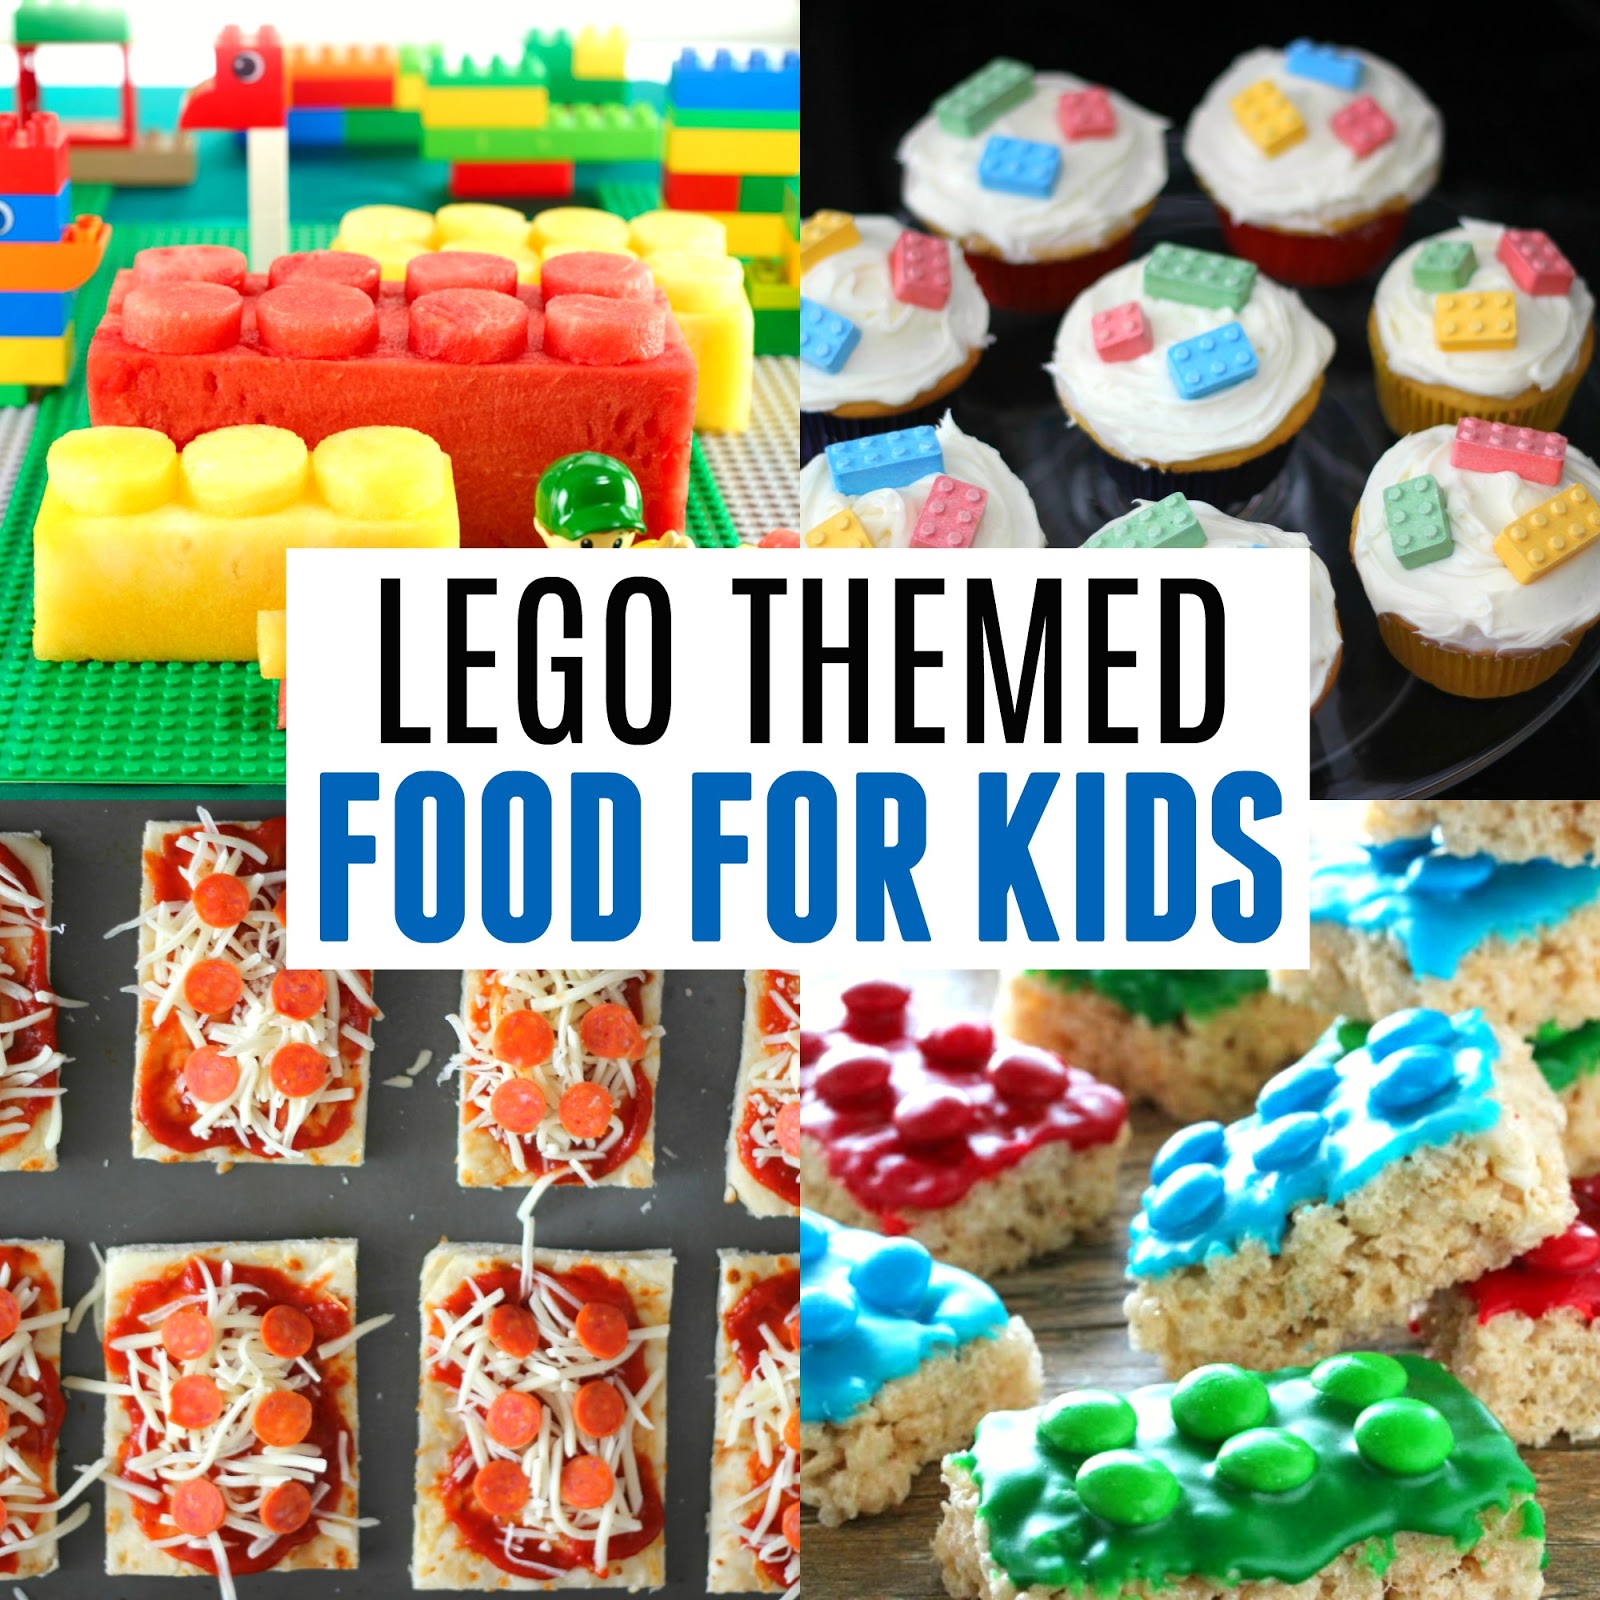 toddler approved!: easy lego brick themed food for kids